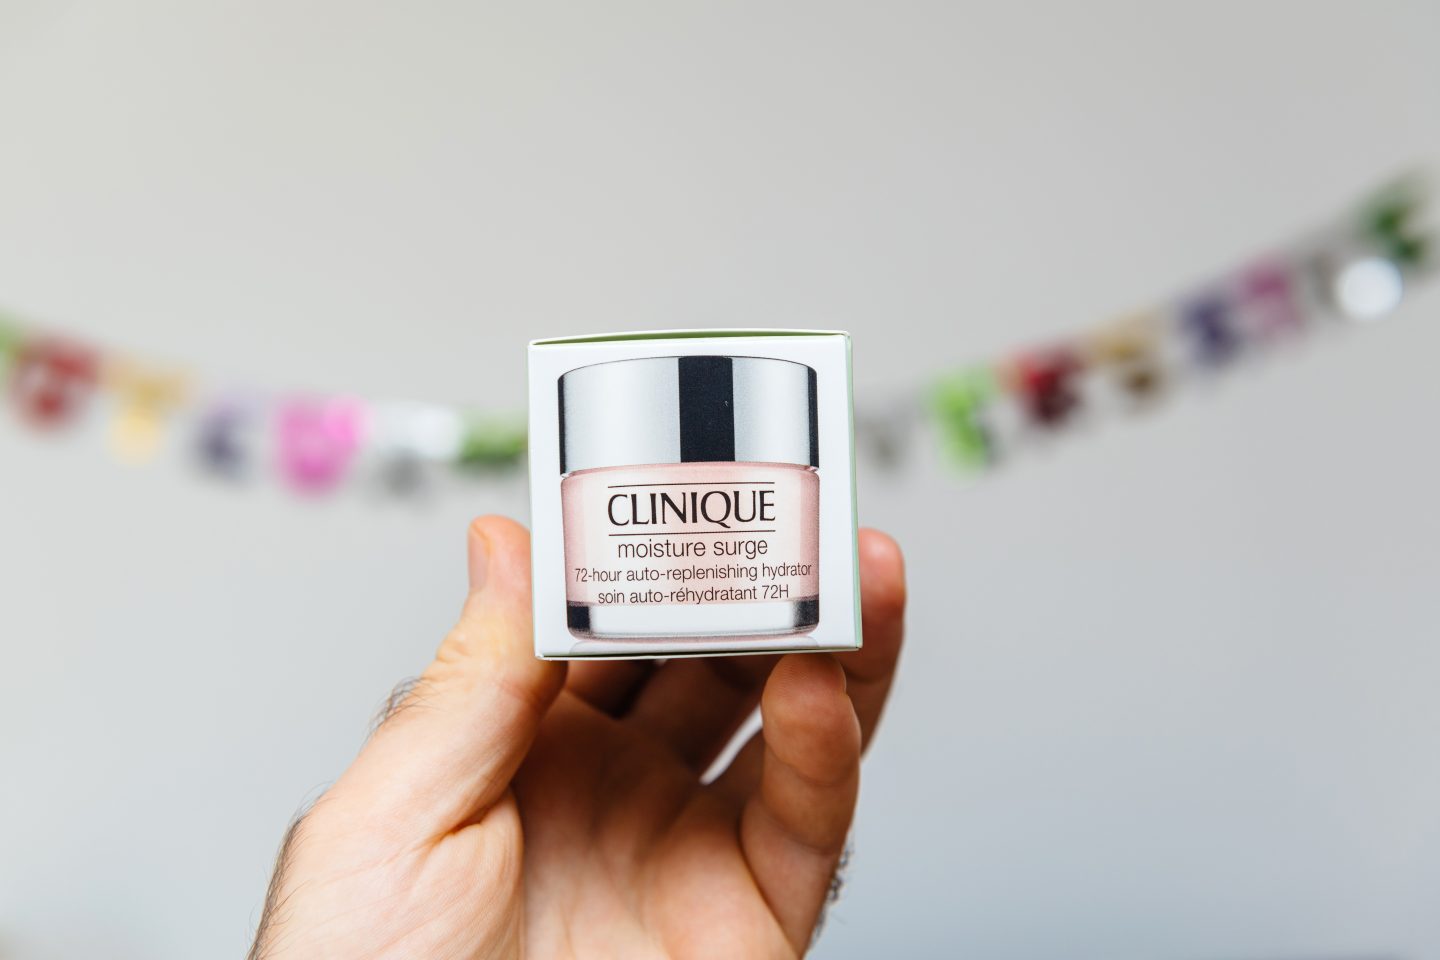 BEST CLINIQUE PRODUCTS - 5 Best Clinique Products on The Market [2021 Review & Buying Guide]